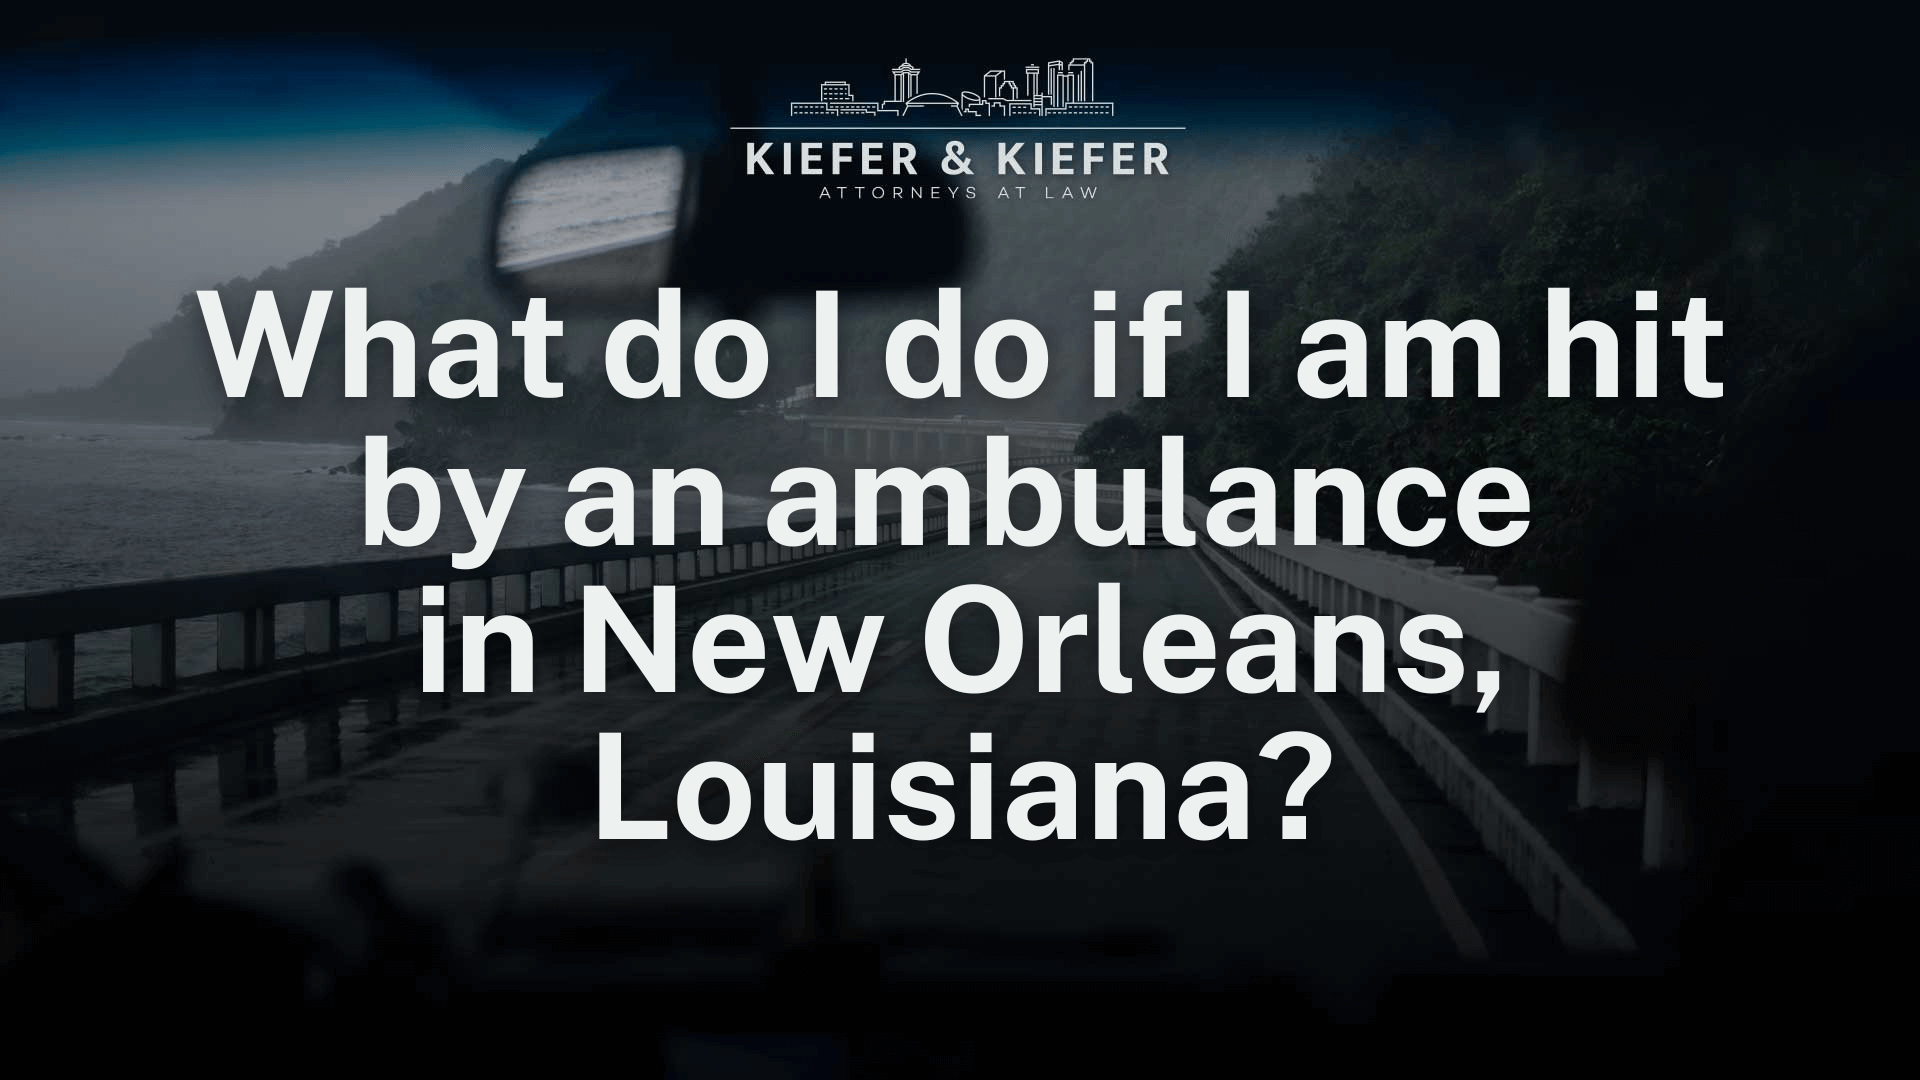 What do I do if I am hit by an ambulance in New Orleans, Louisiana - Kiefer & Kiefer New Orleans Personal Injury Attorneys